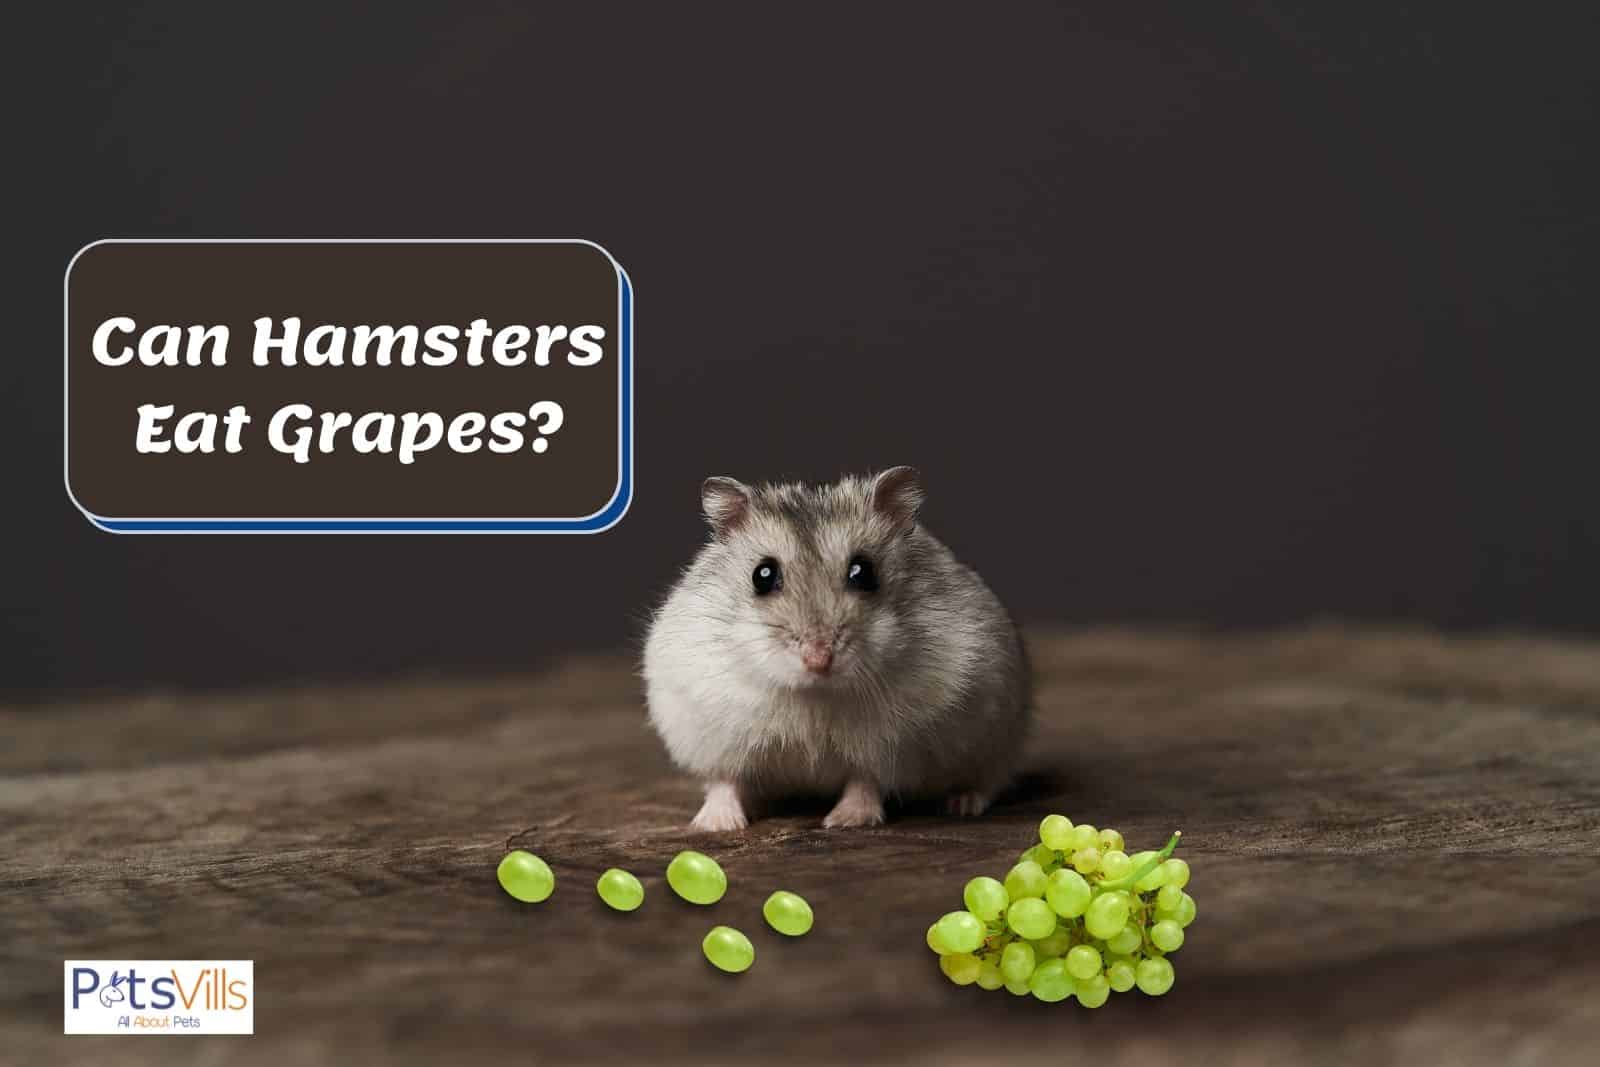 a hamster with grapes in front of him, can hamsters eat grapes